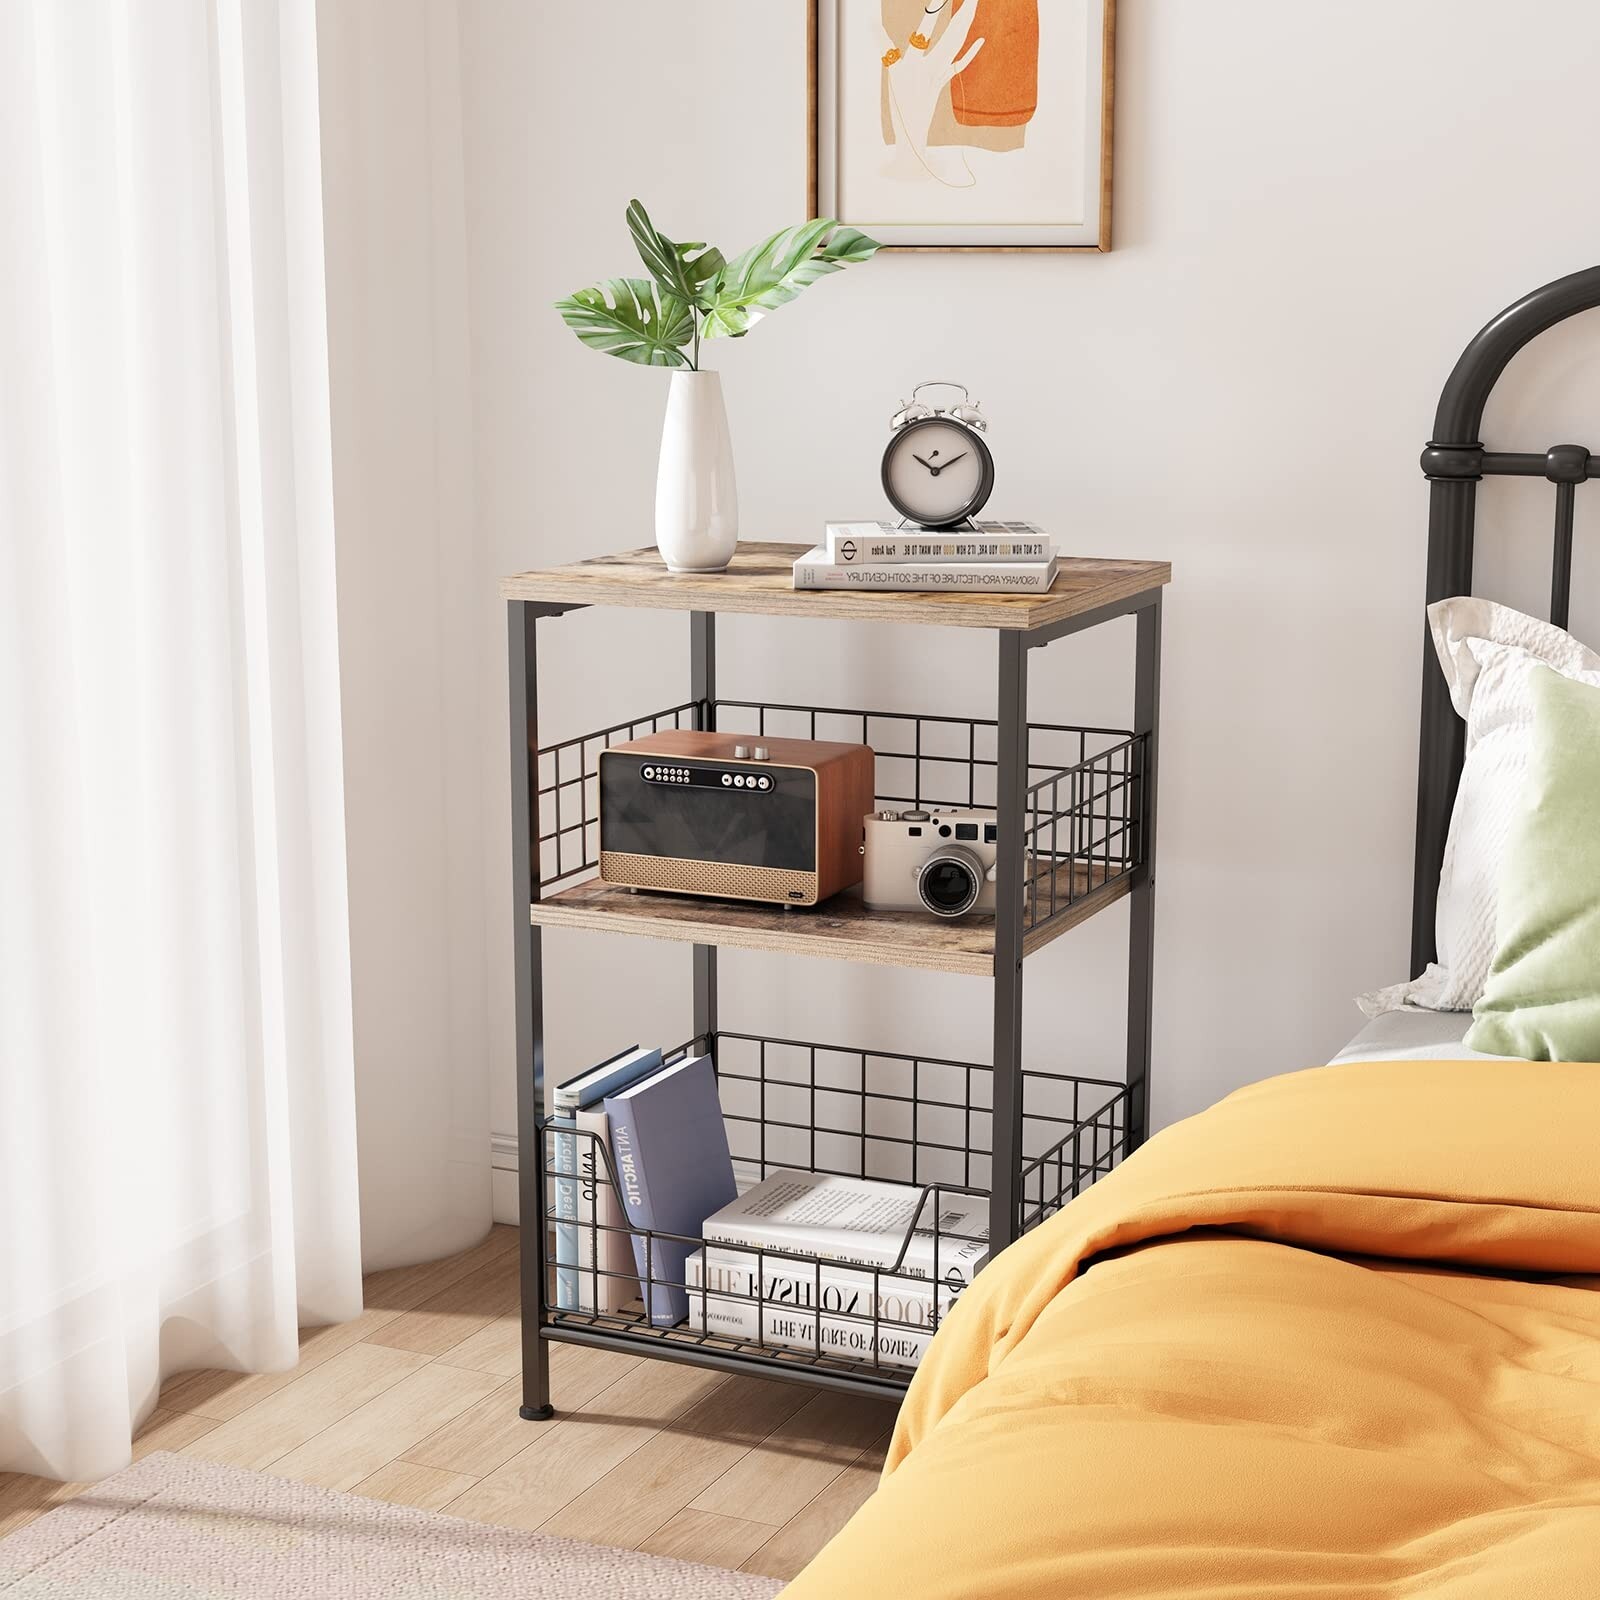 Side Table, Small End Table, Tall Nightstand for Living Room, Bedroom,  Office, Bathroom - On Sale - Bed Bath & Beyond - 37176769